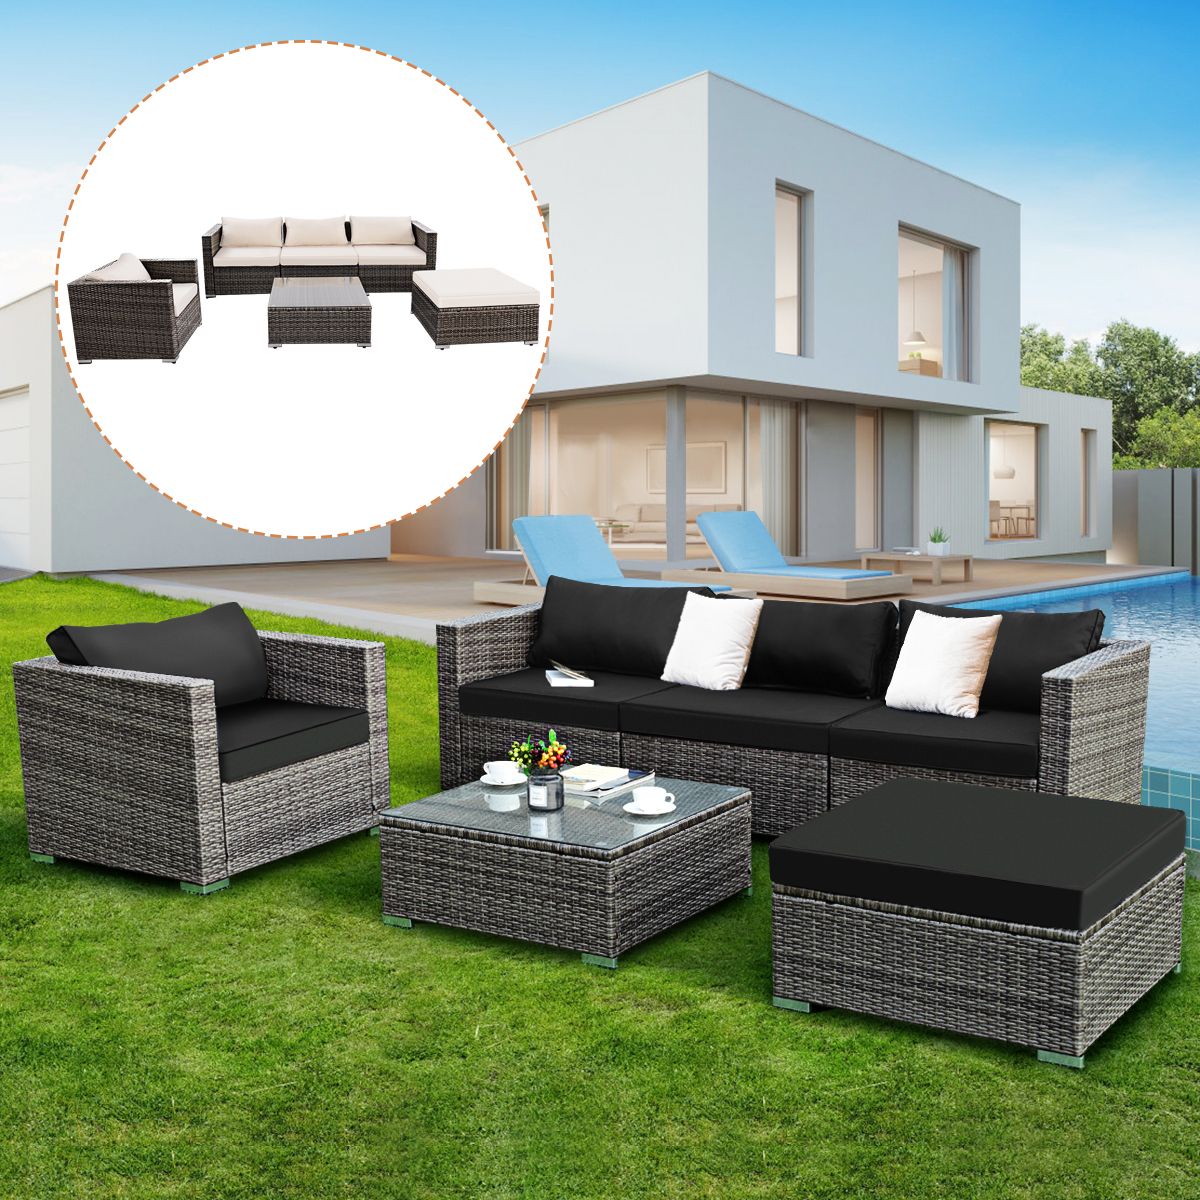 Costway 6 Piece Patio Rattan Wicker Furniture Set Sectional Sofa Couch Inside Widely Used 6 Piece Outdoor Sectional Sofa Patio Sets (View 9 of 15)